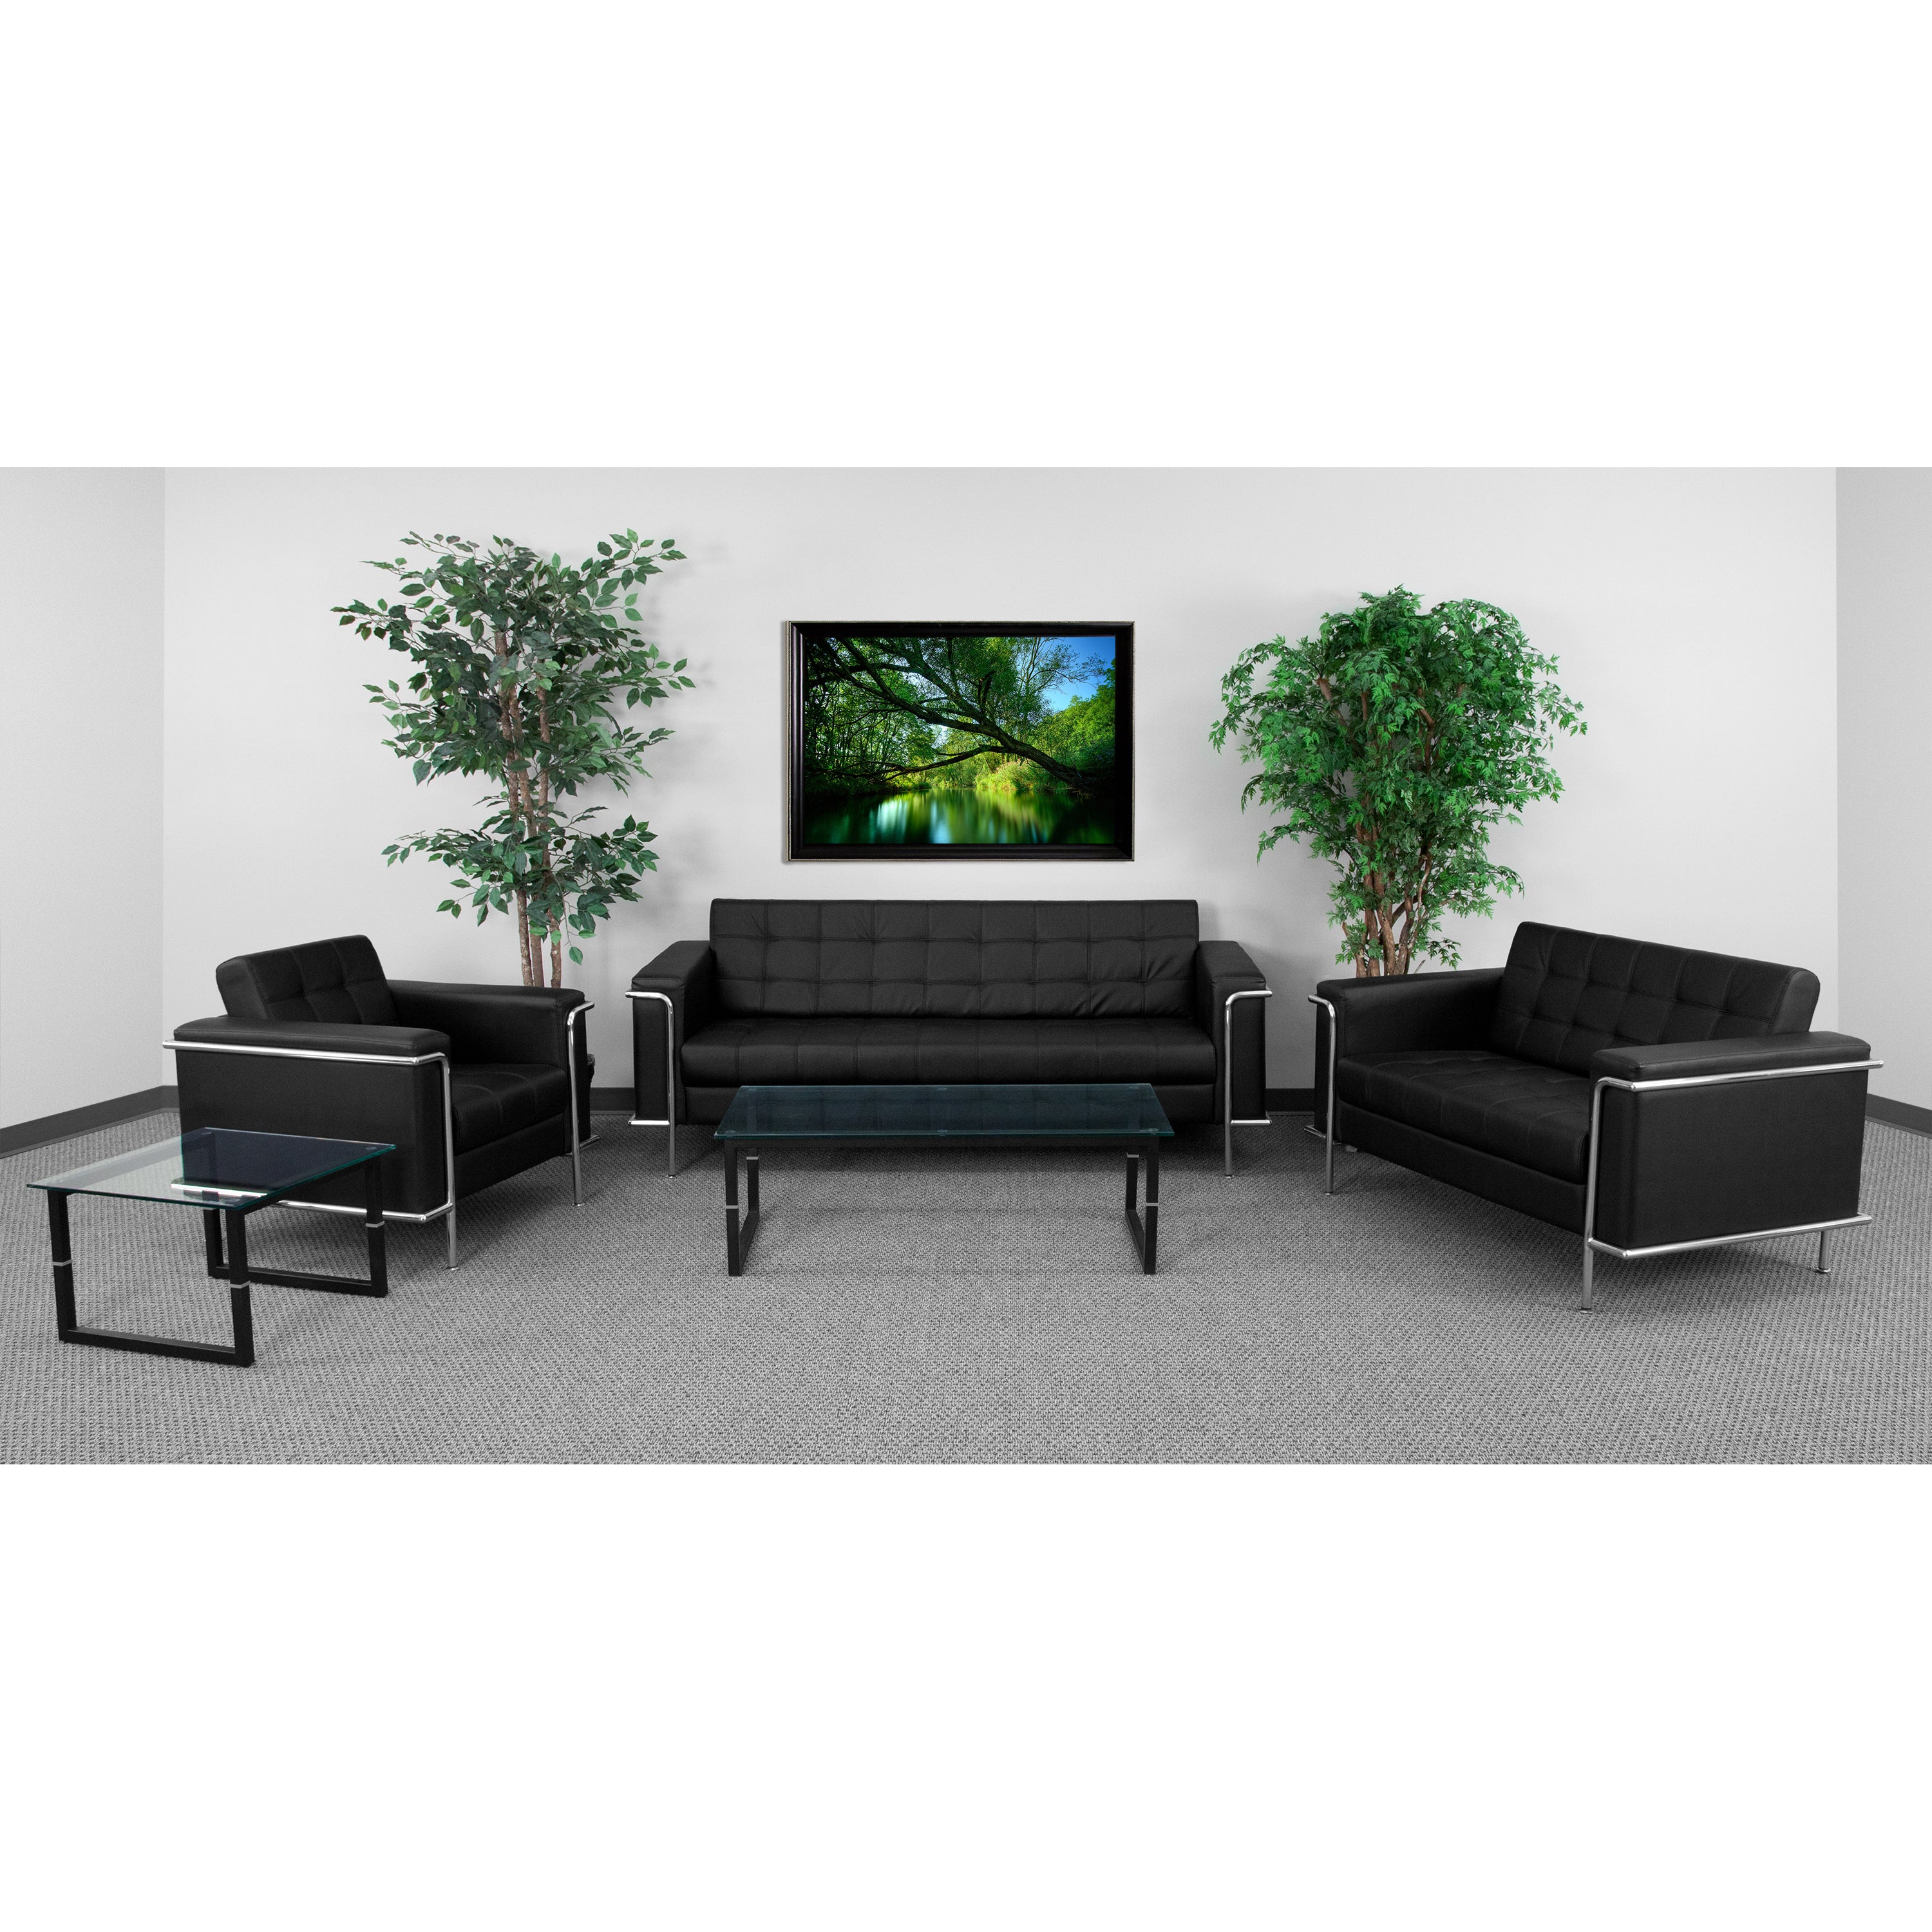 HERCULES LeatherSoft Double Stitch Detail Reception Set with Encasing Frame-Reception Set-Flash Furniture-Wall2Wall Furnishings